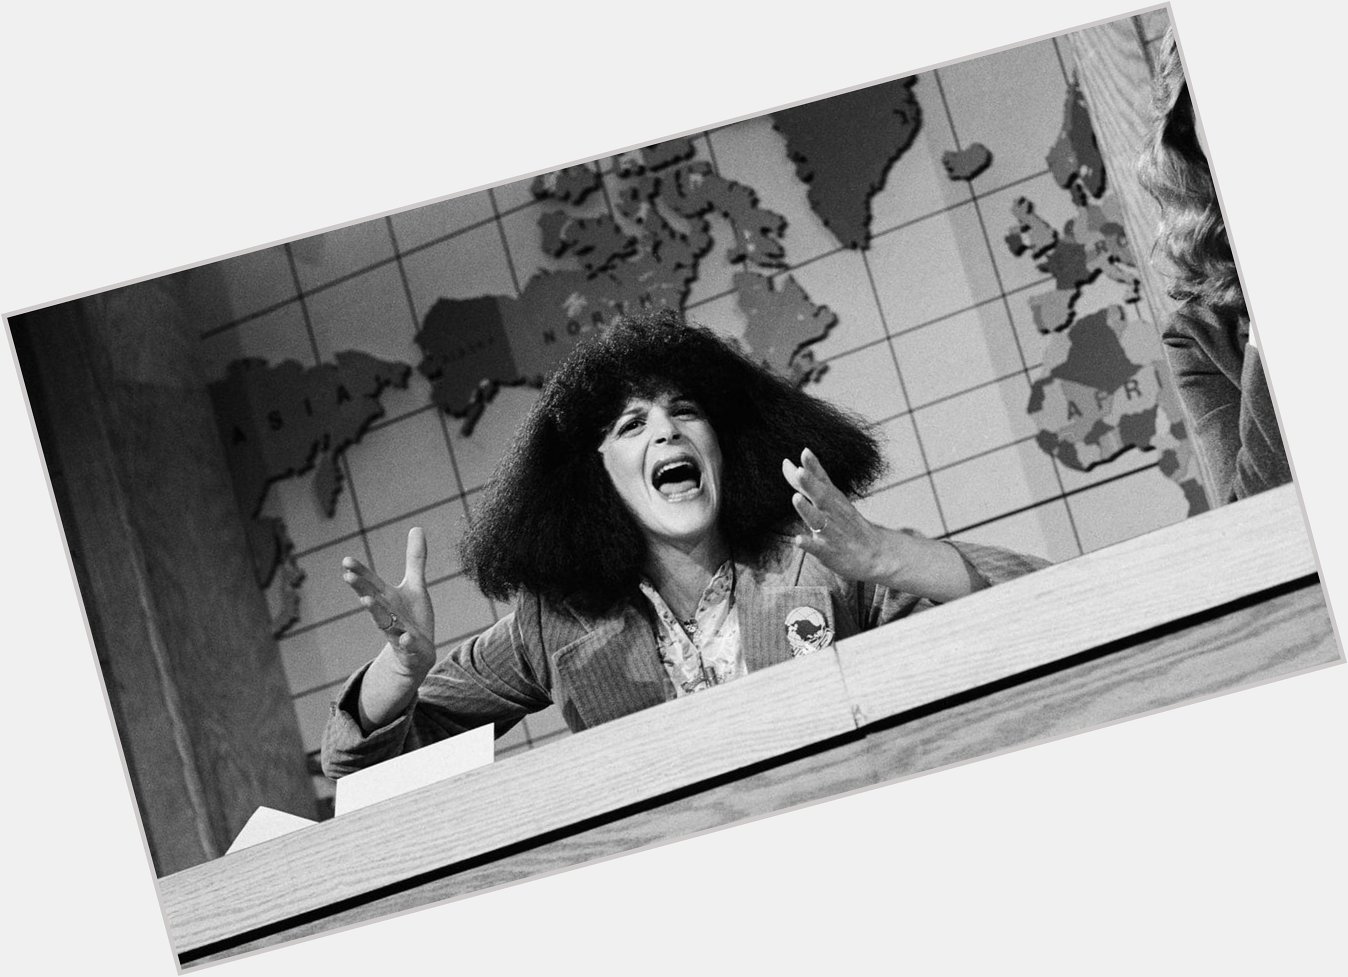 Happy Birthday to Gilda Radner, who would have turned 69 today! 